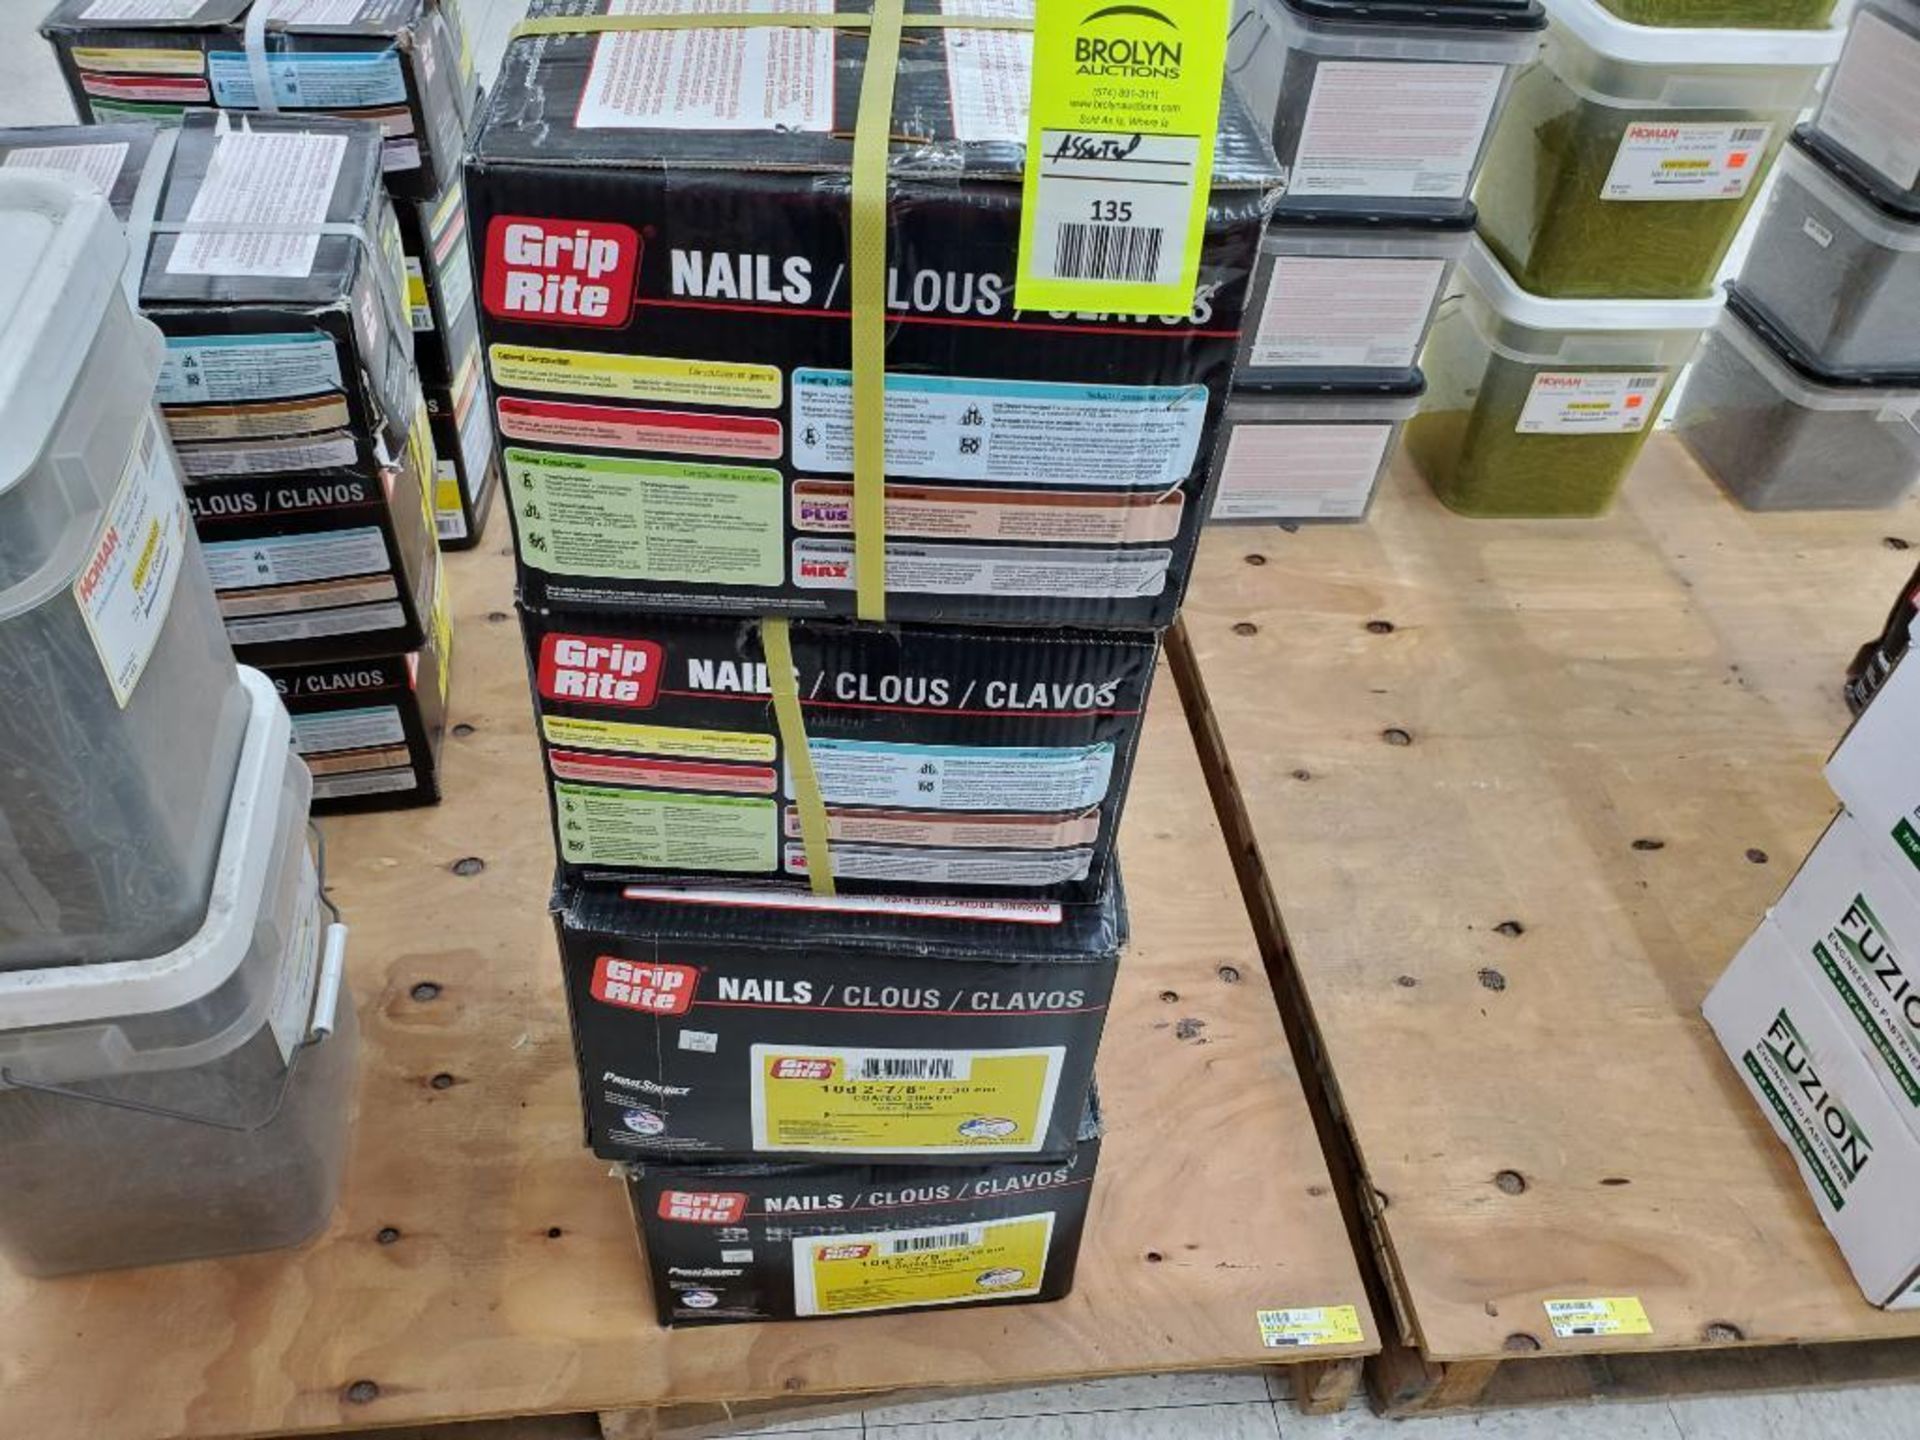 Qty 4 - 50lb boxes of 10D 2-7/8" coated sinker nails. New stock.